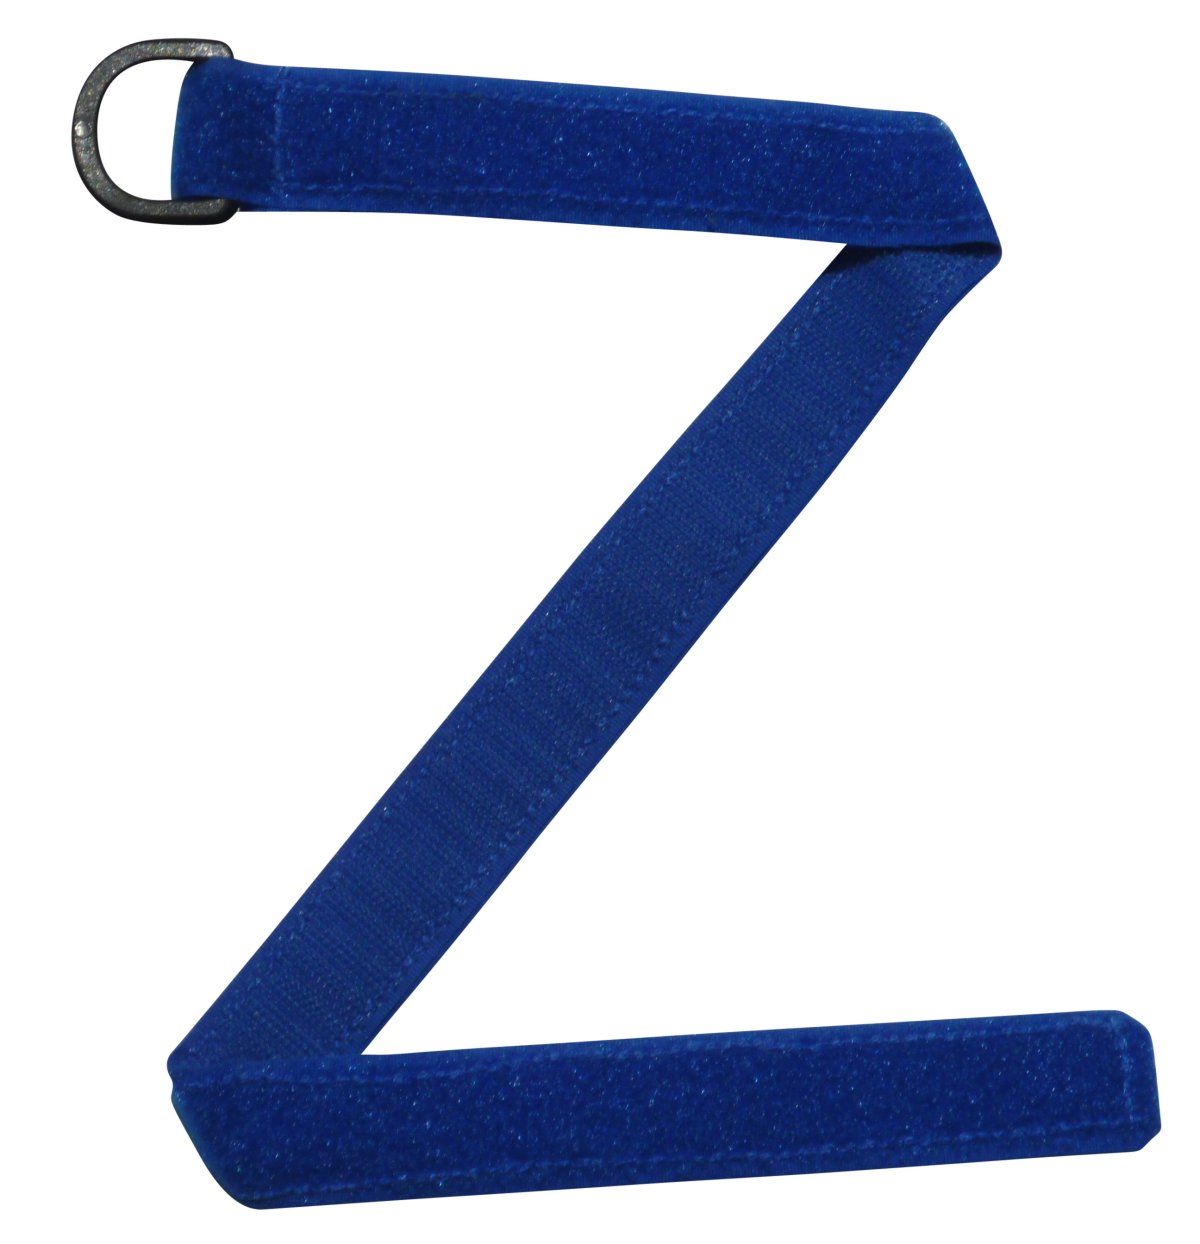 Benristraps 25mm back to back hook & loop strap in blue with D ring (pair)